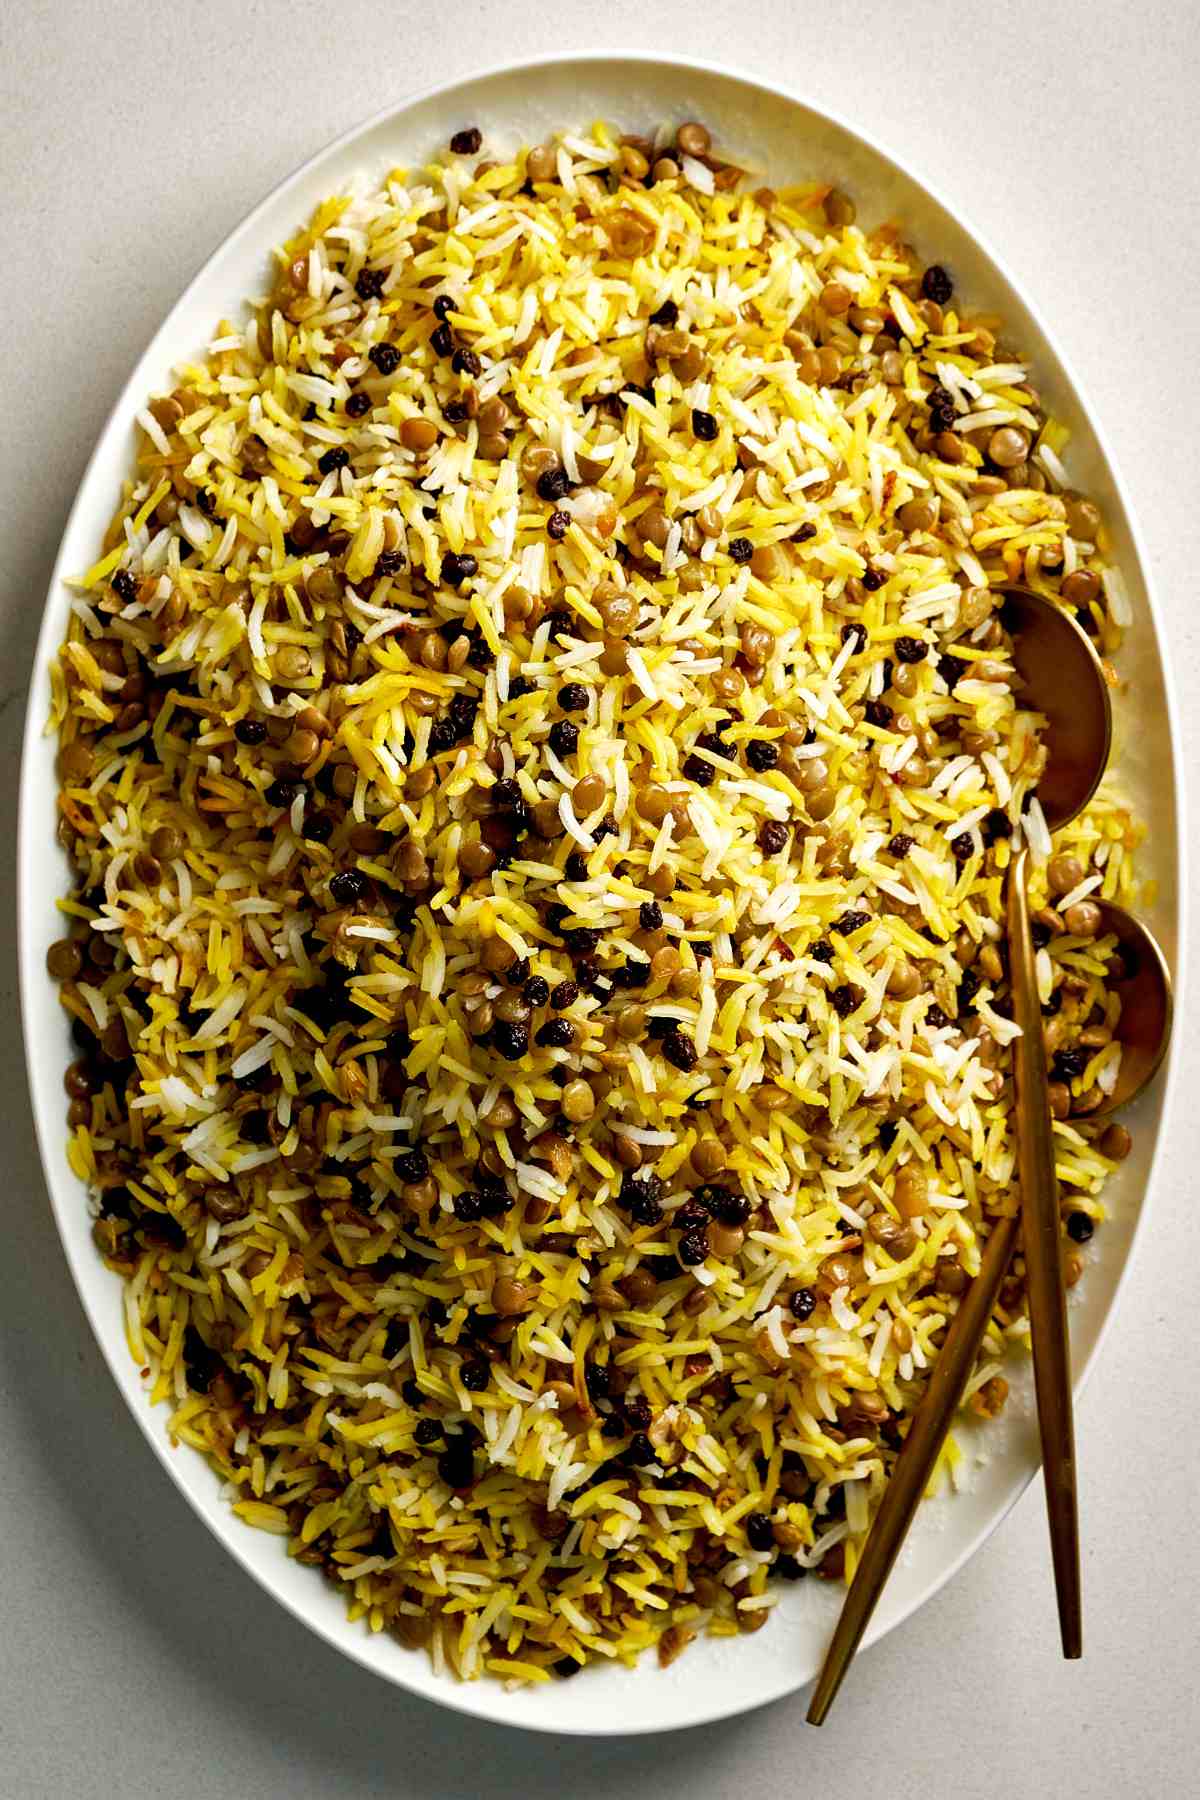 Yellow rice with lentils and currants in serving dish with gold spoons.